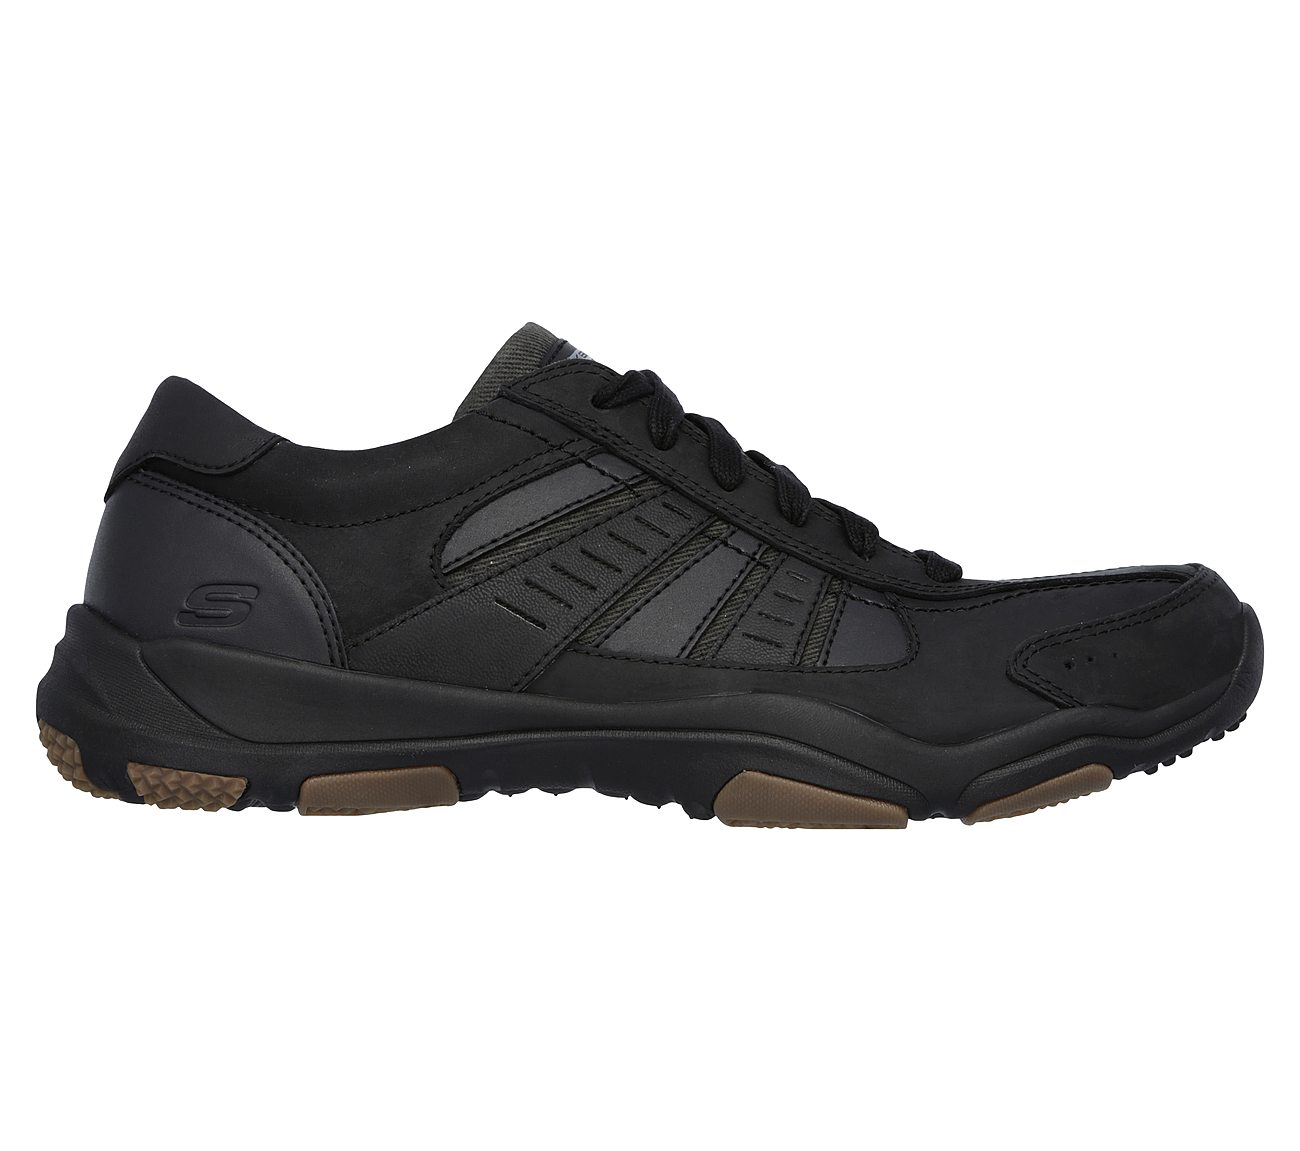 Larson SKECHERS Relaxed Fit Shoes